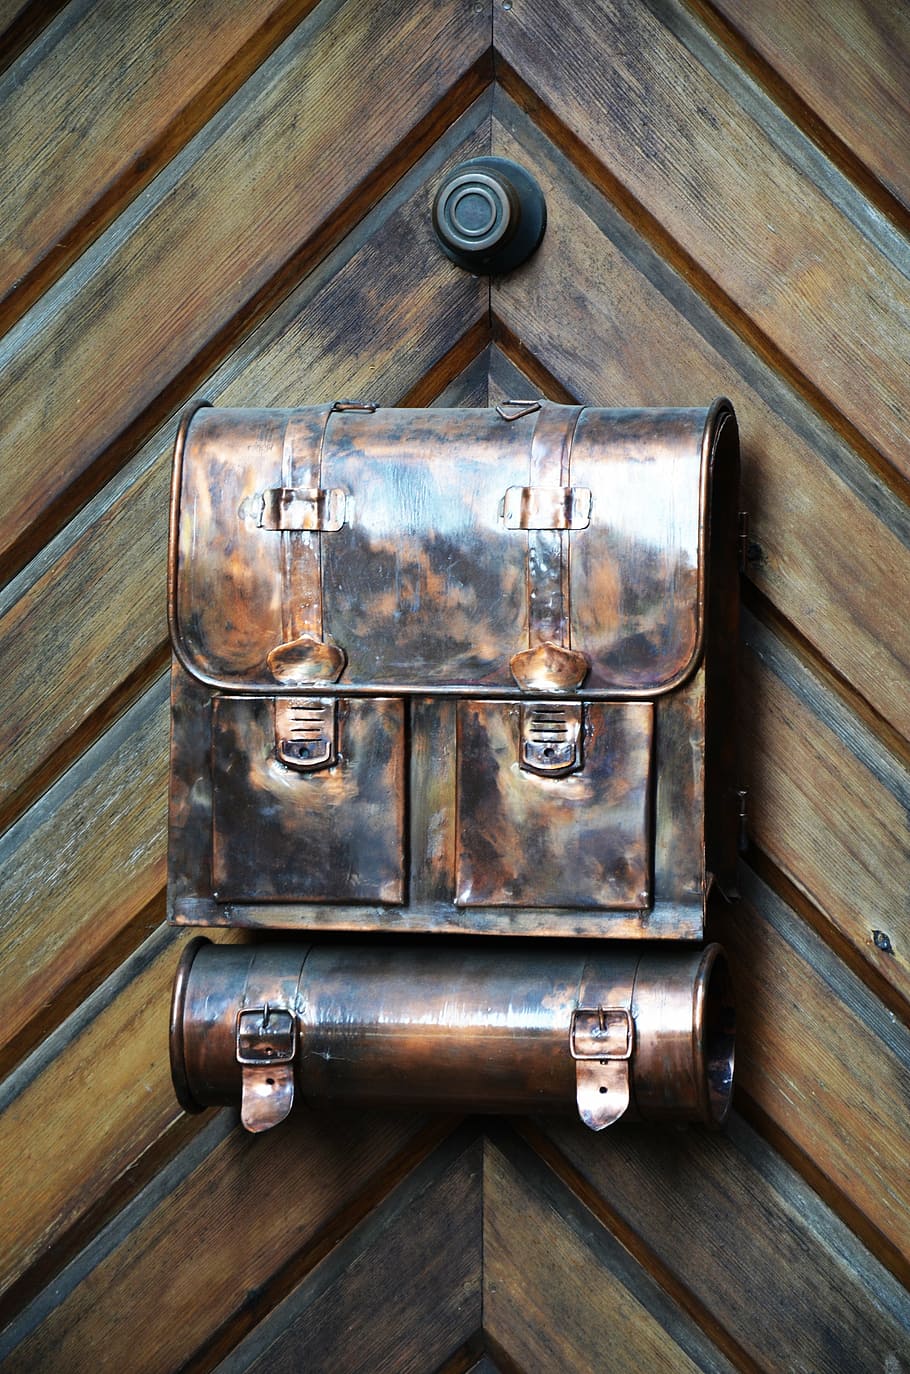 mailbox, post, letter boxes, blacksmithing, newspaper, metal, wood - material, indoors, close-up, still life